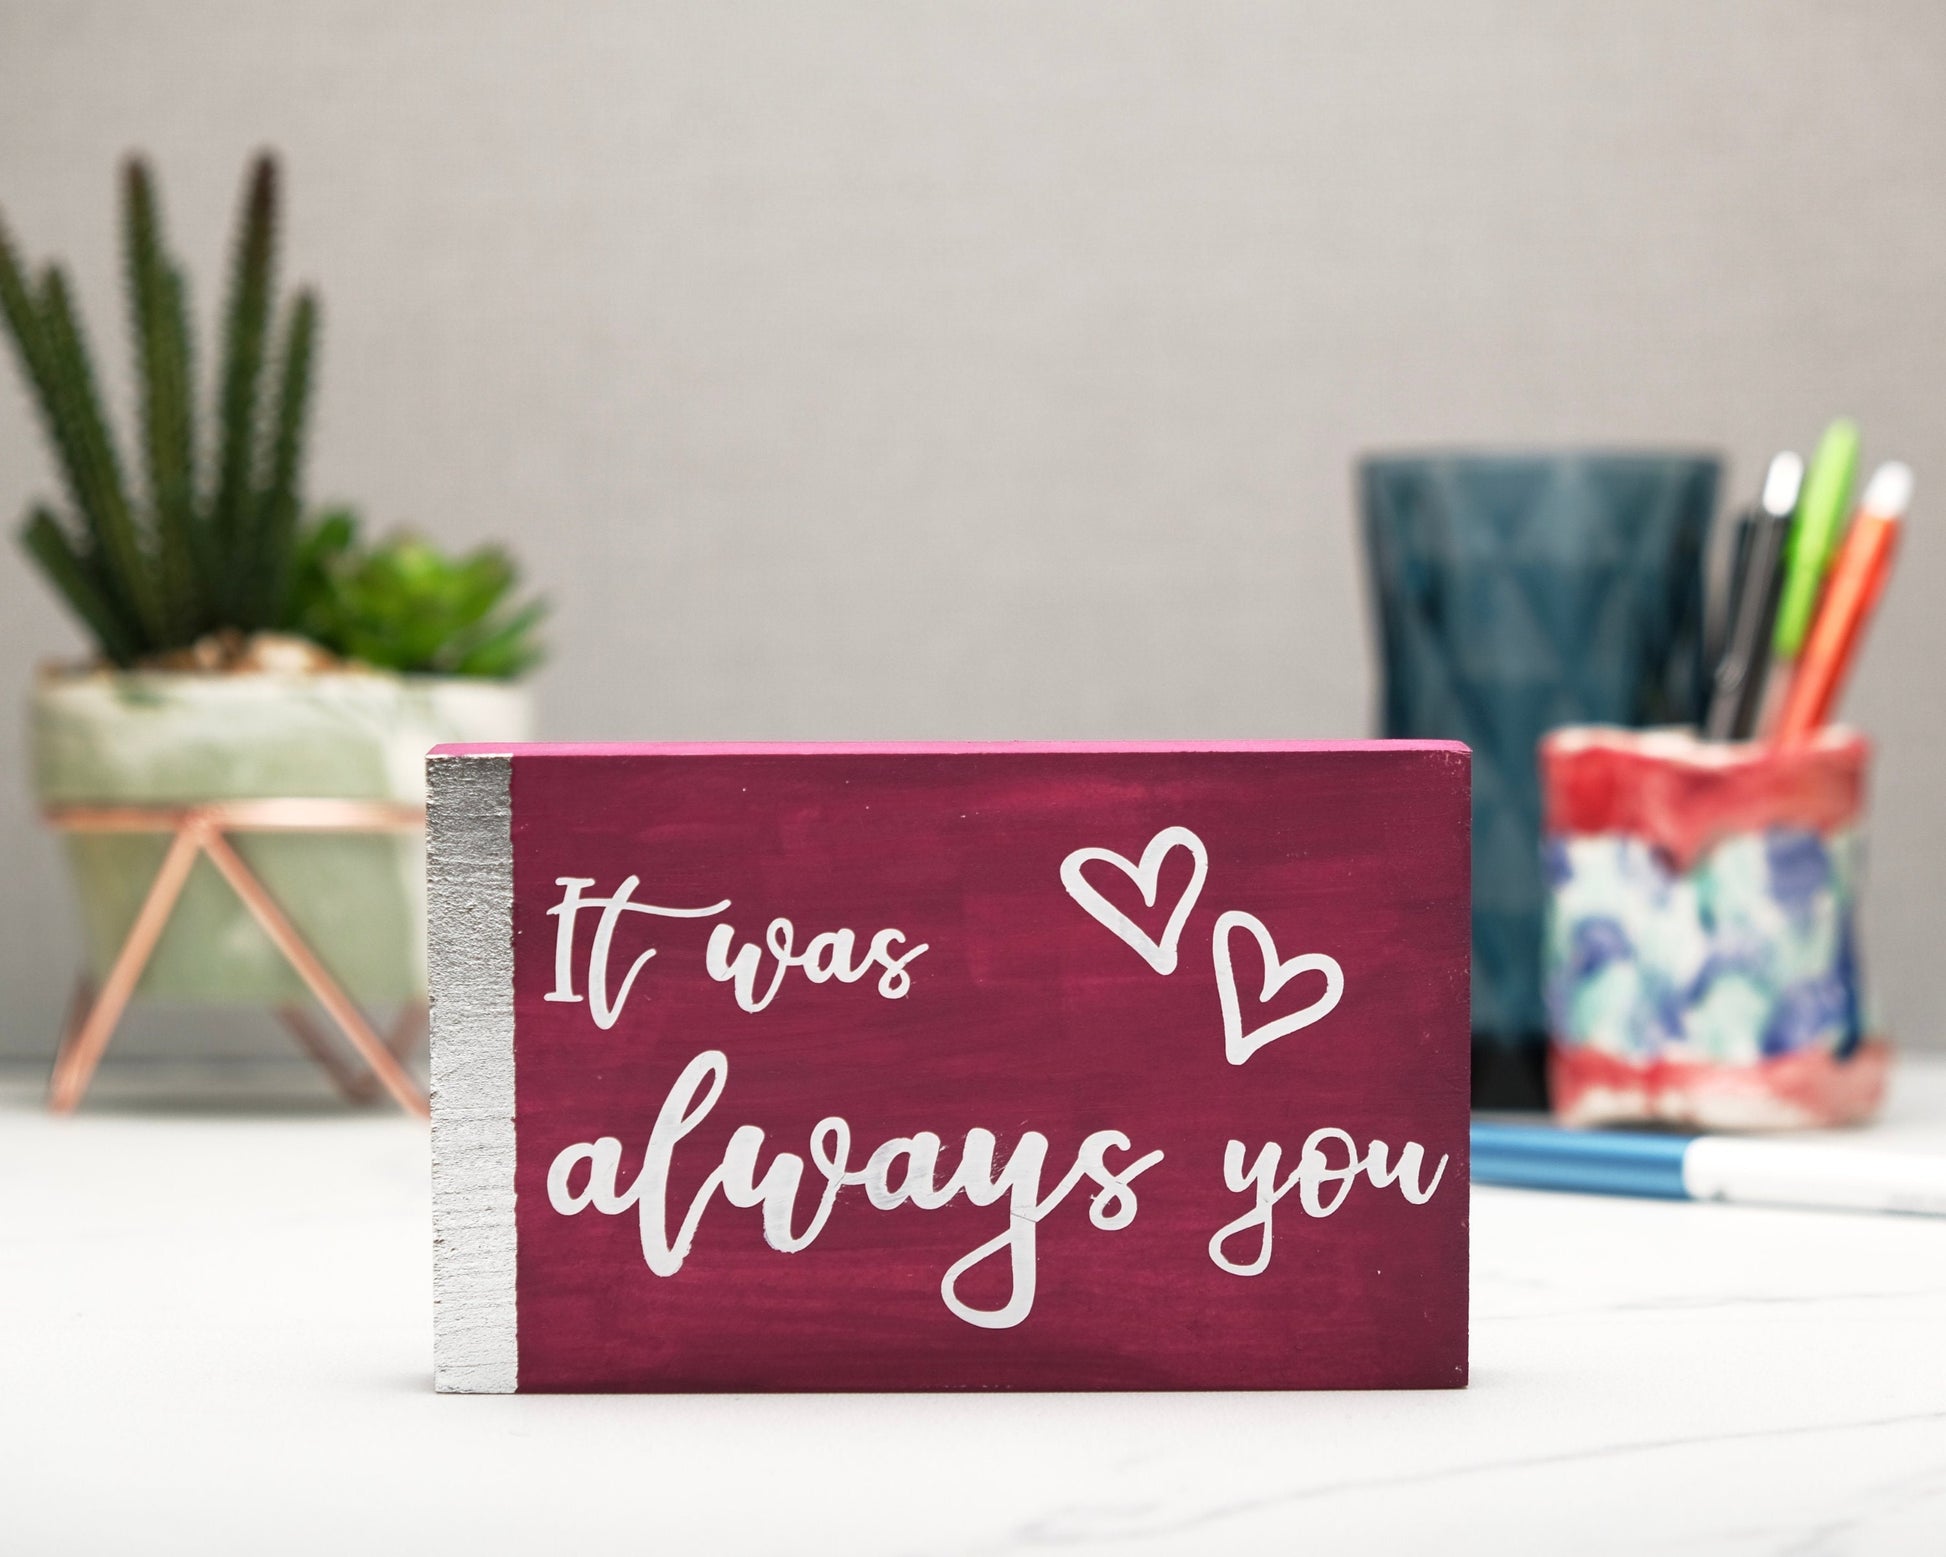 Small freestanding rectangular wooden sign facing straight on. Berry with silver vertical border on left side. White painted message, It was always you, with two heart outlines top right corner. Plant and pen pot out of focus in background.